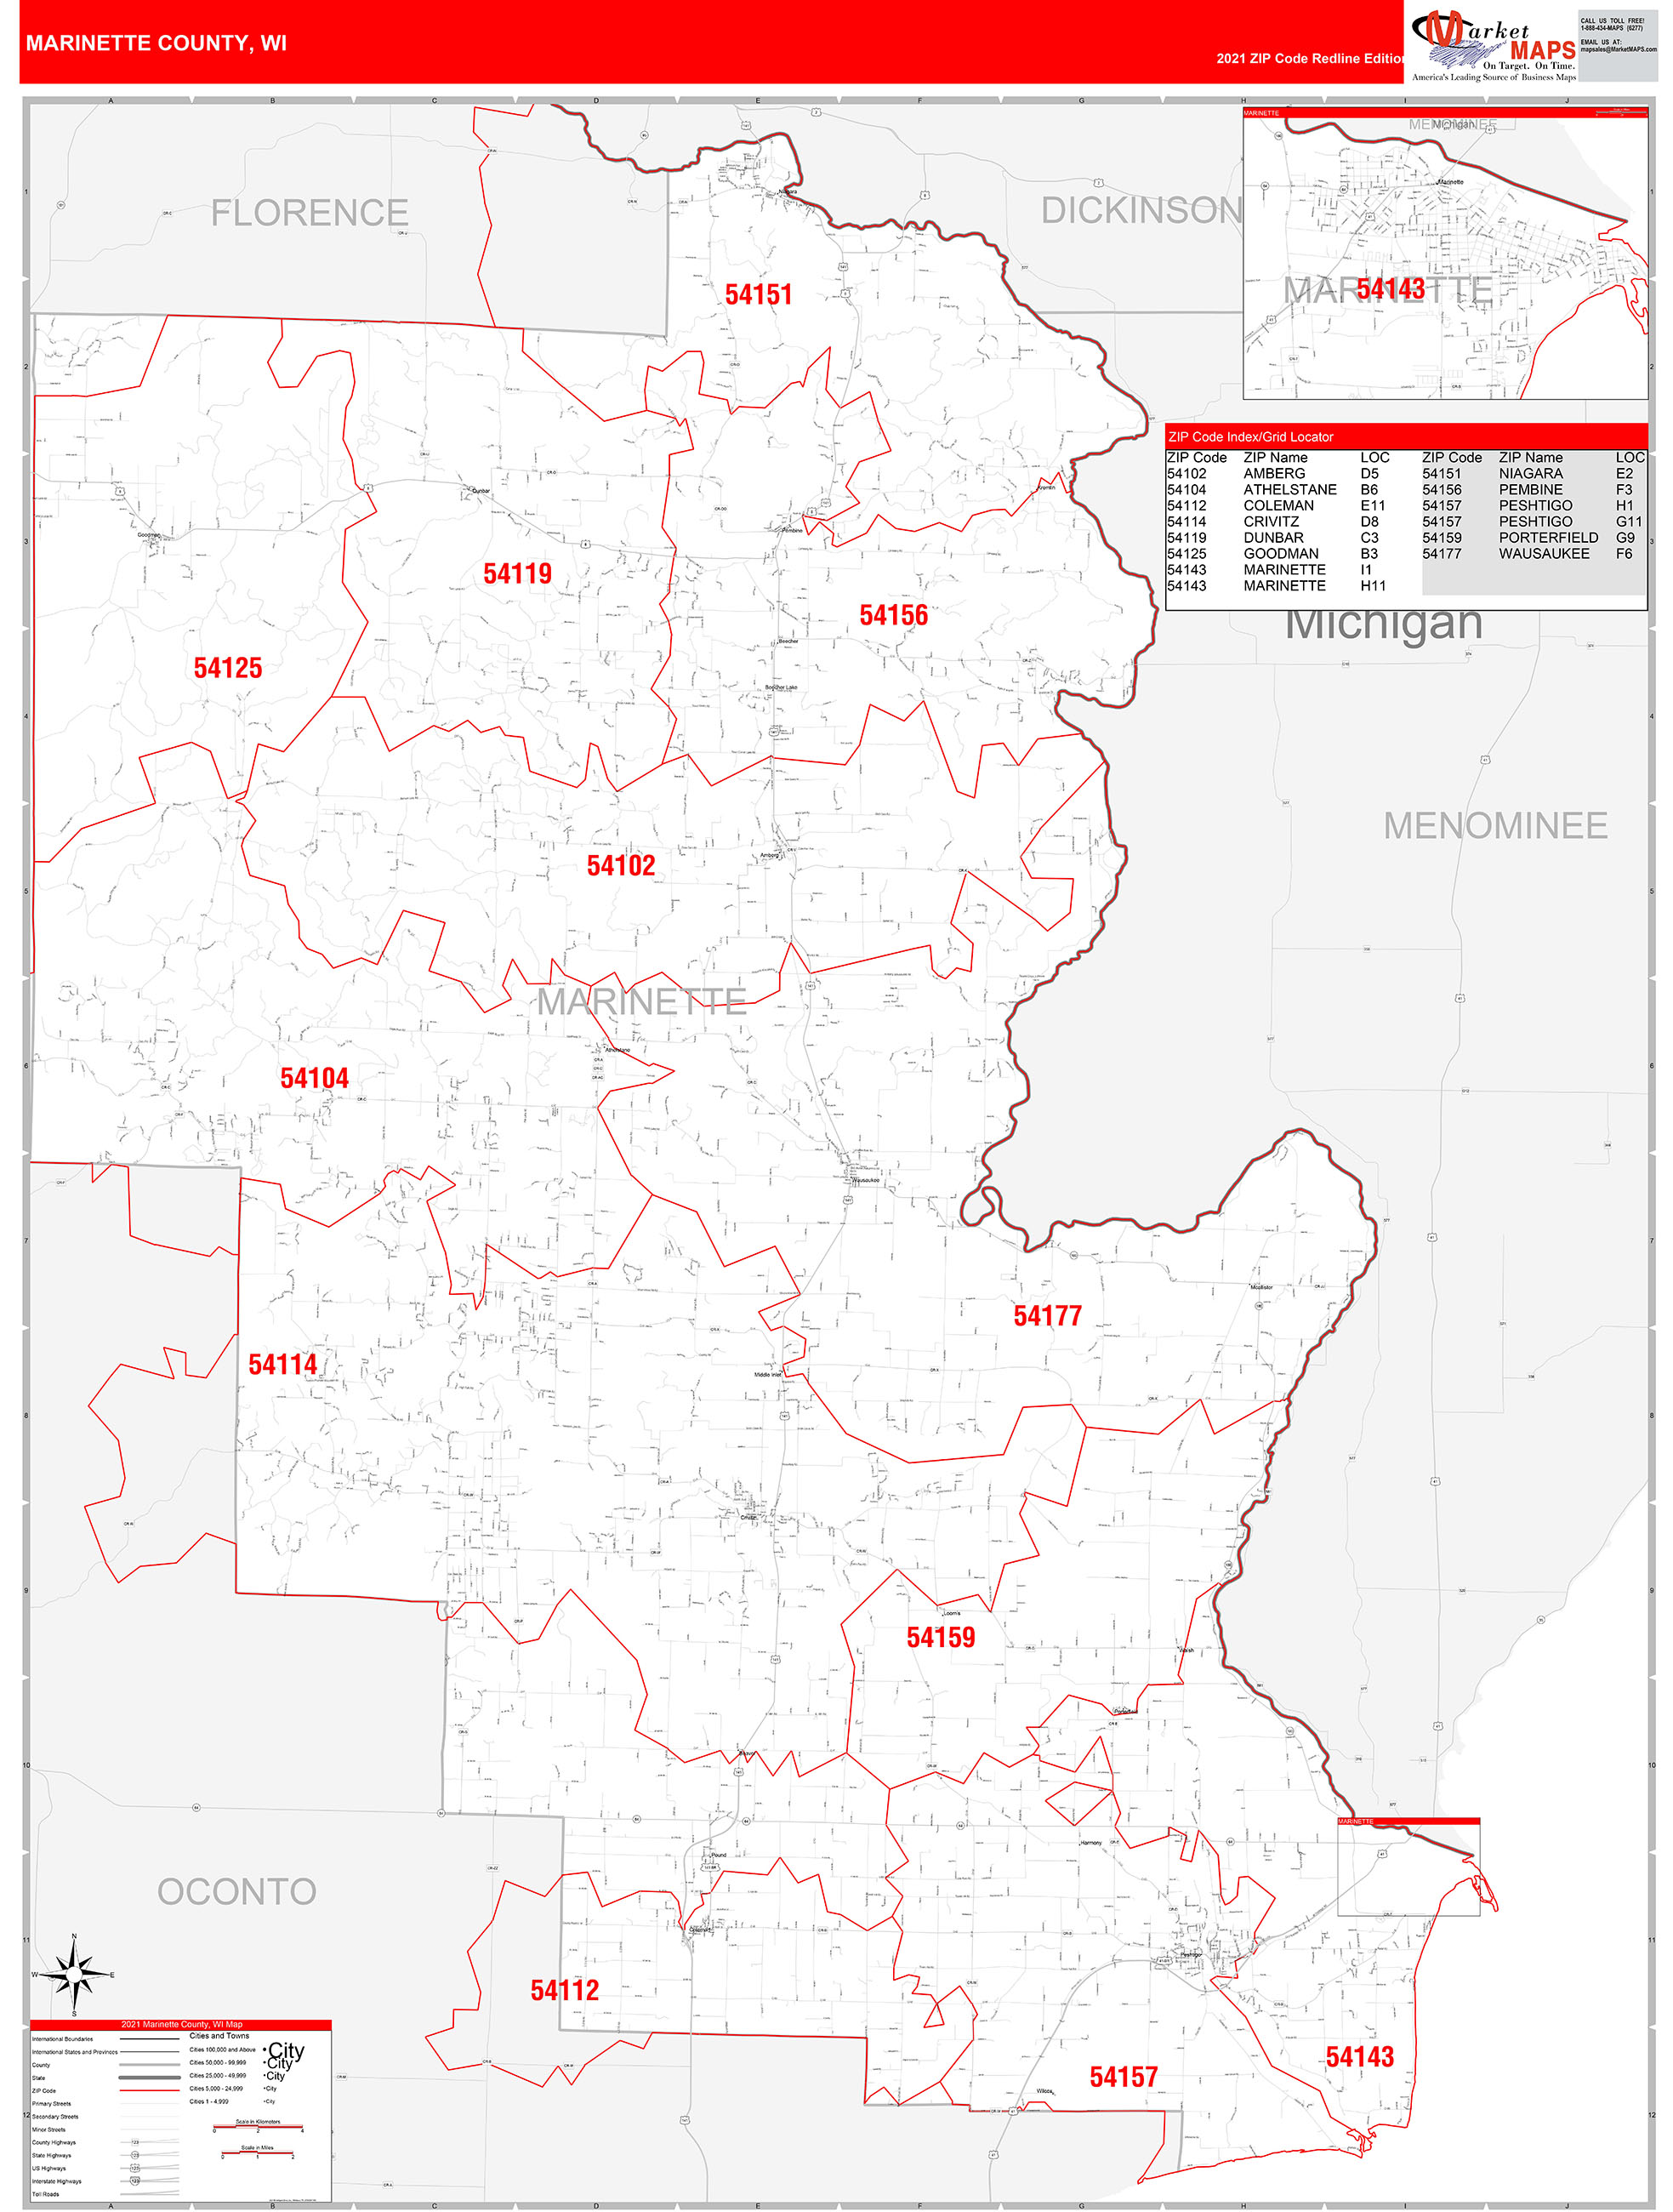 Marinette County, WI Zip Code Wall Map Red Line Style by MarketMAPS ...